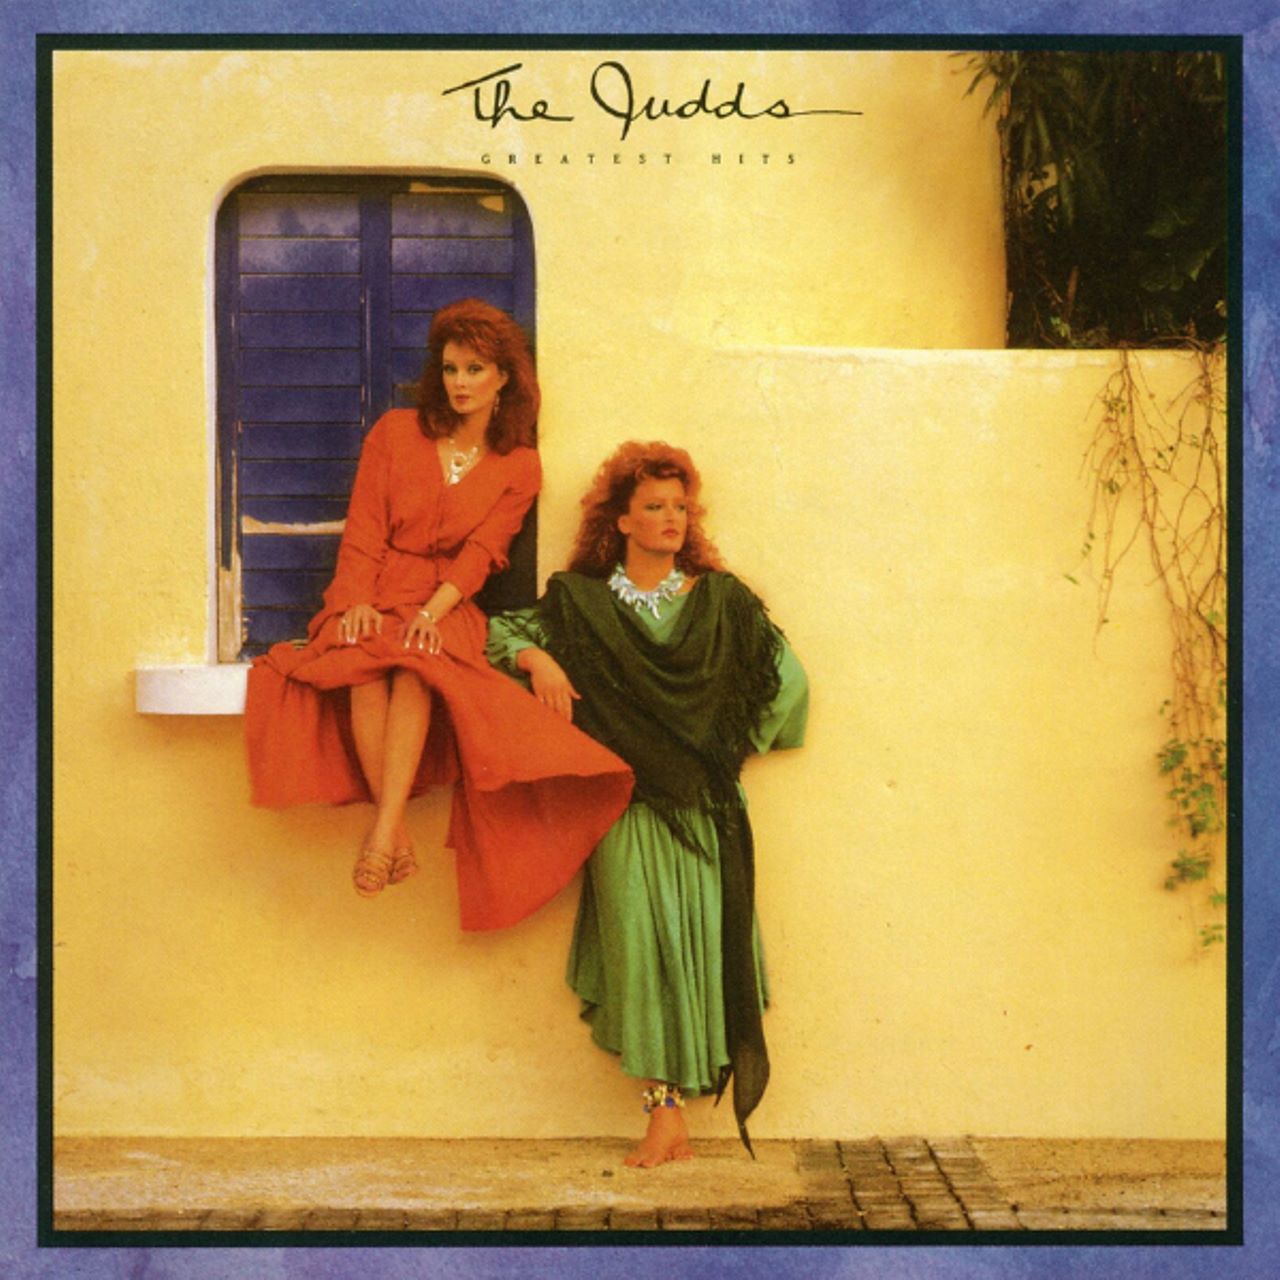 Judds – Greatest Hits cover album